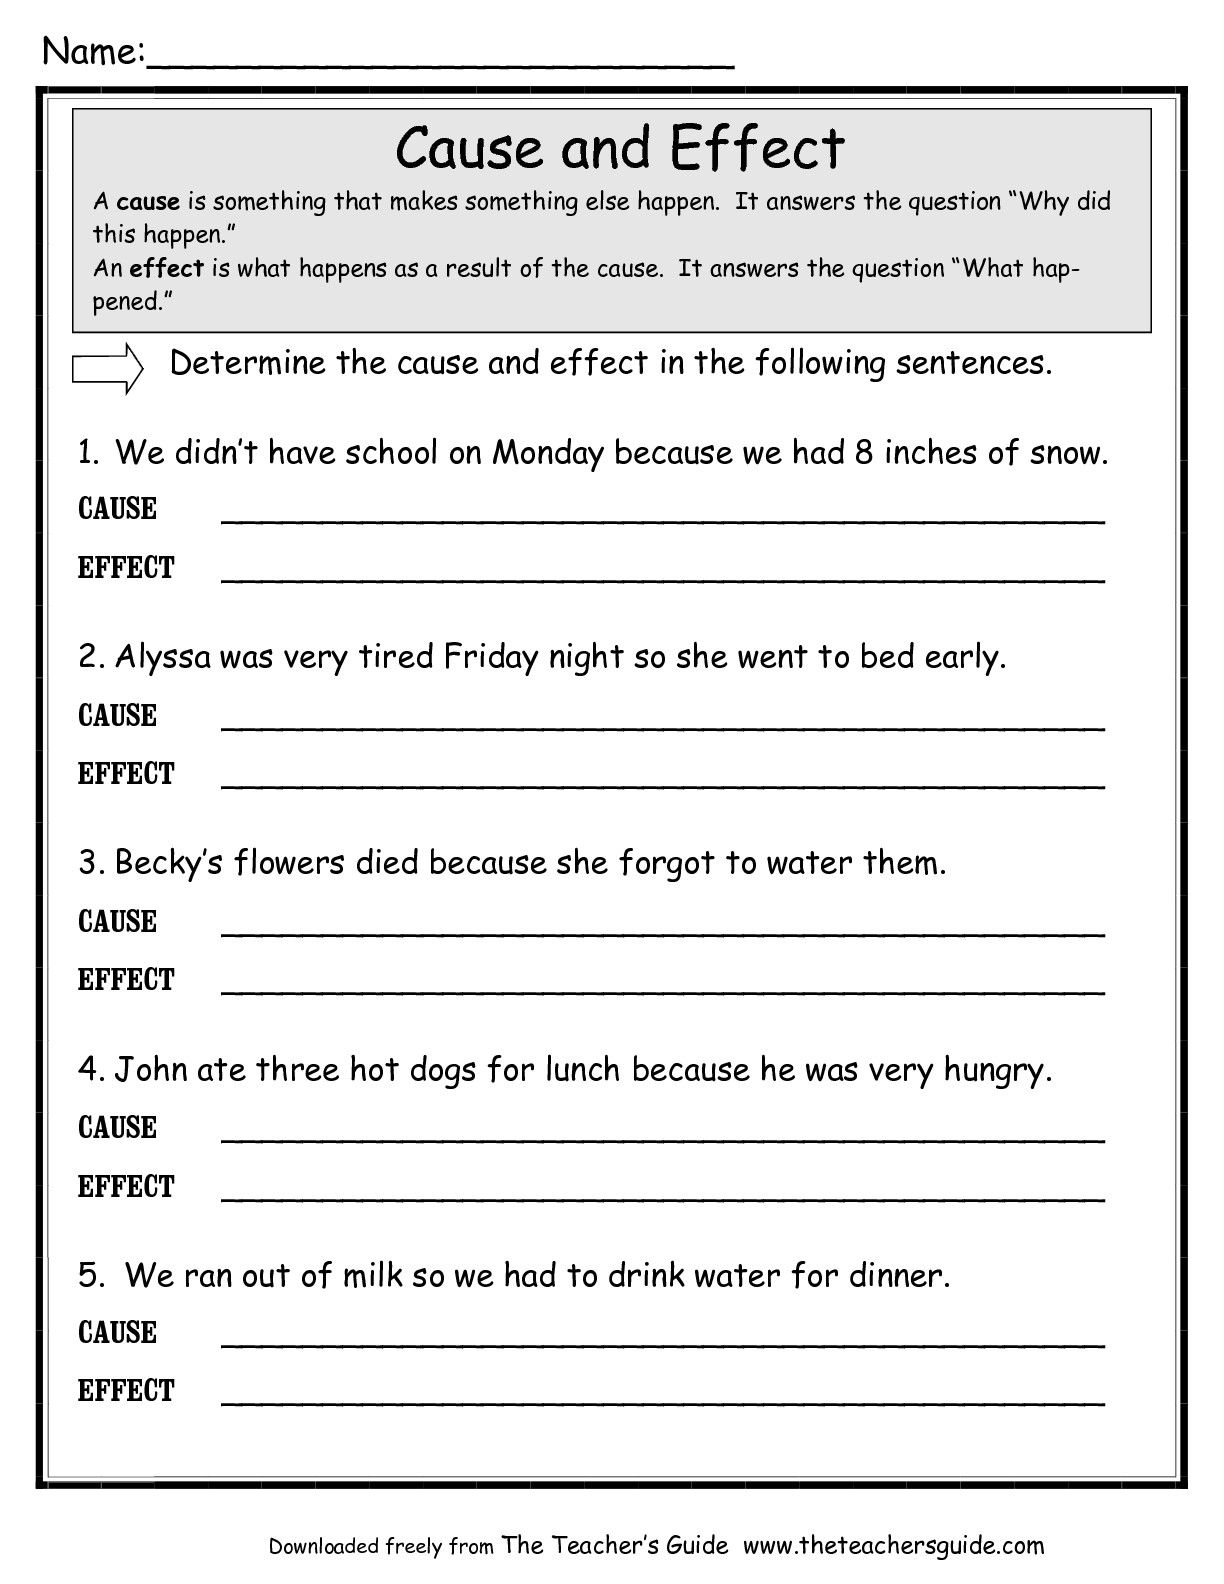 Cause And Effect Worksheets - Google Search | Education | Cause | Free Printable Cause And Effect Worksheets For Third Grade